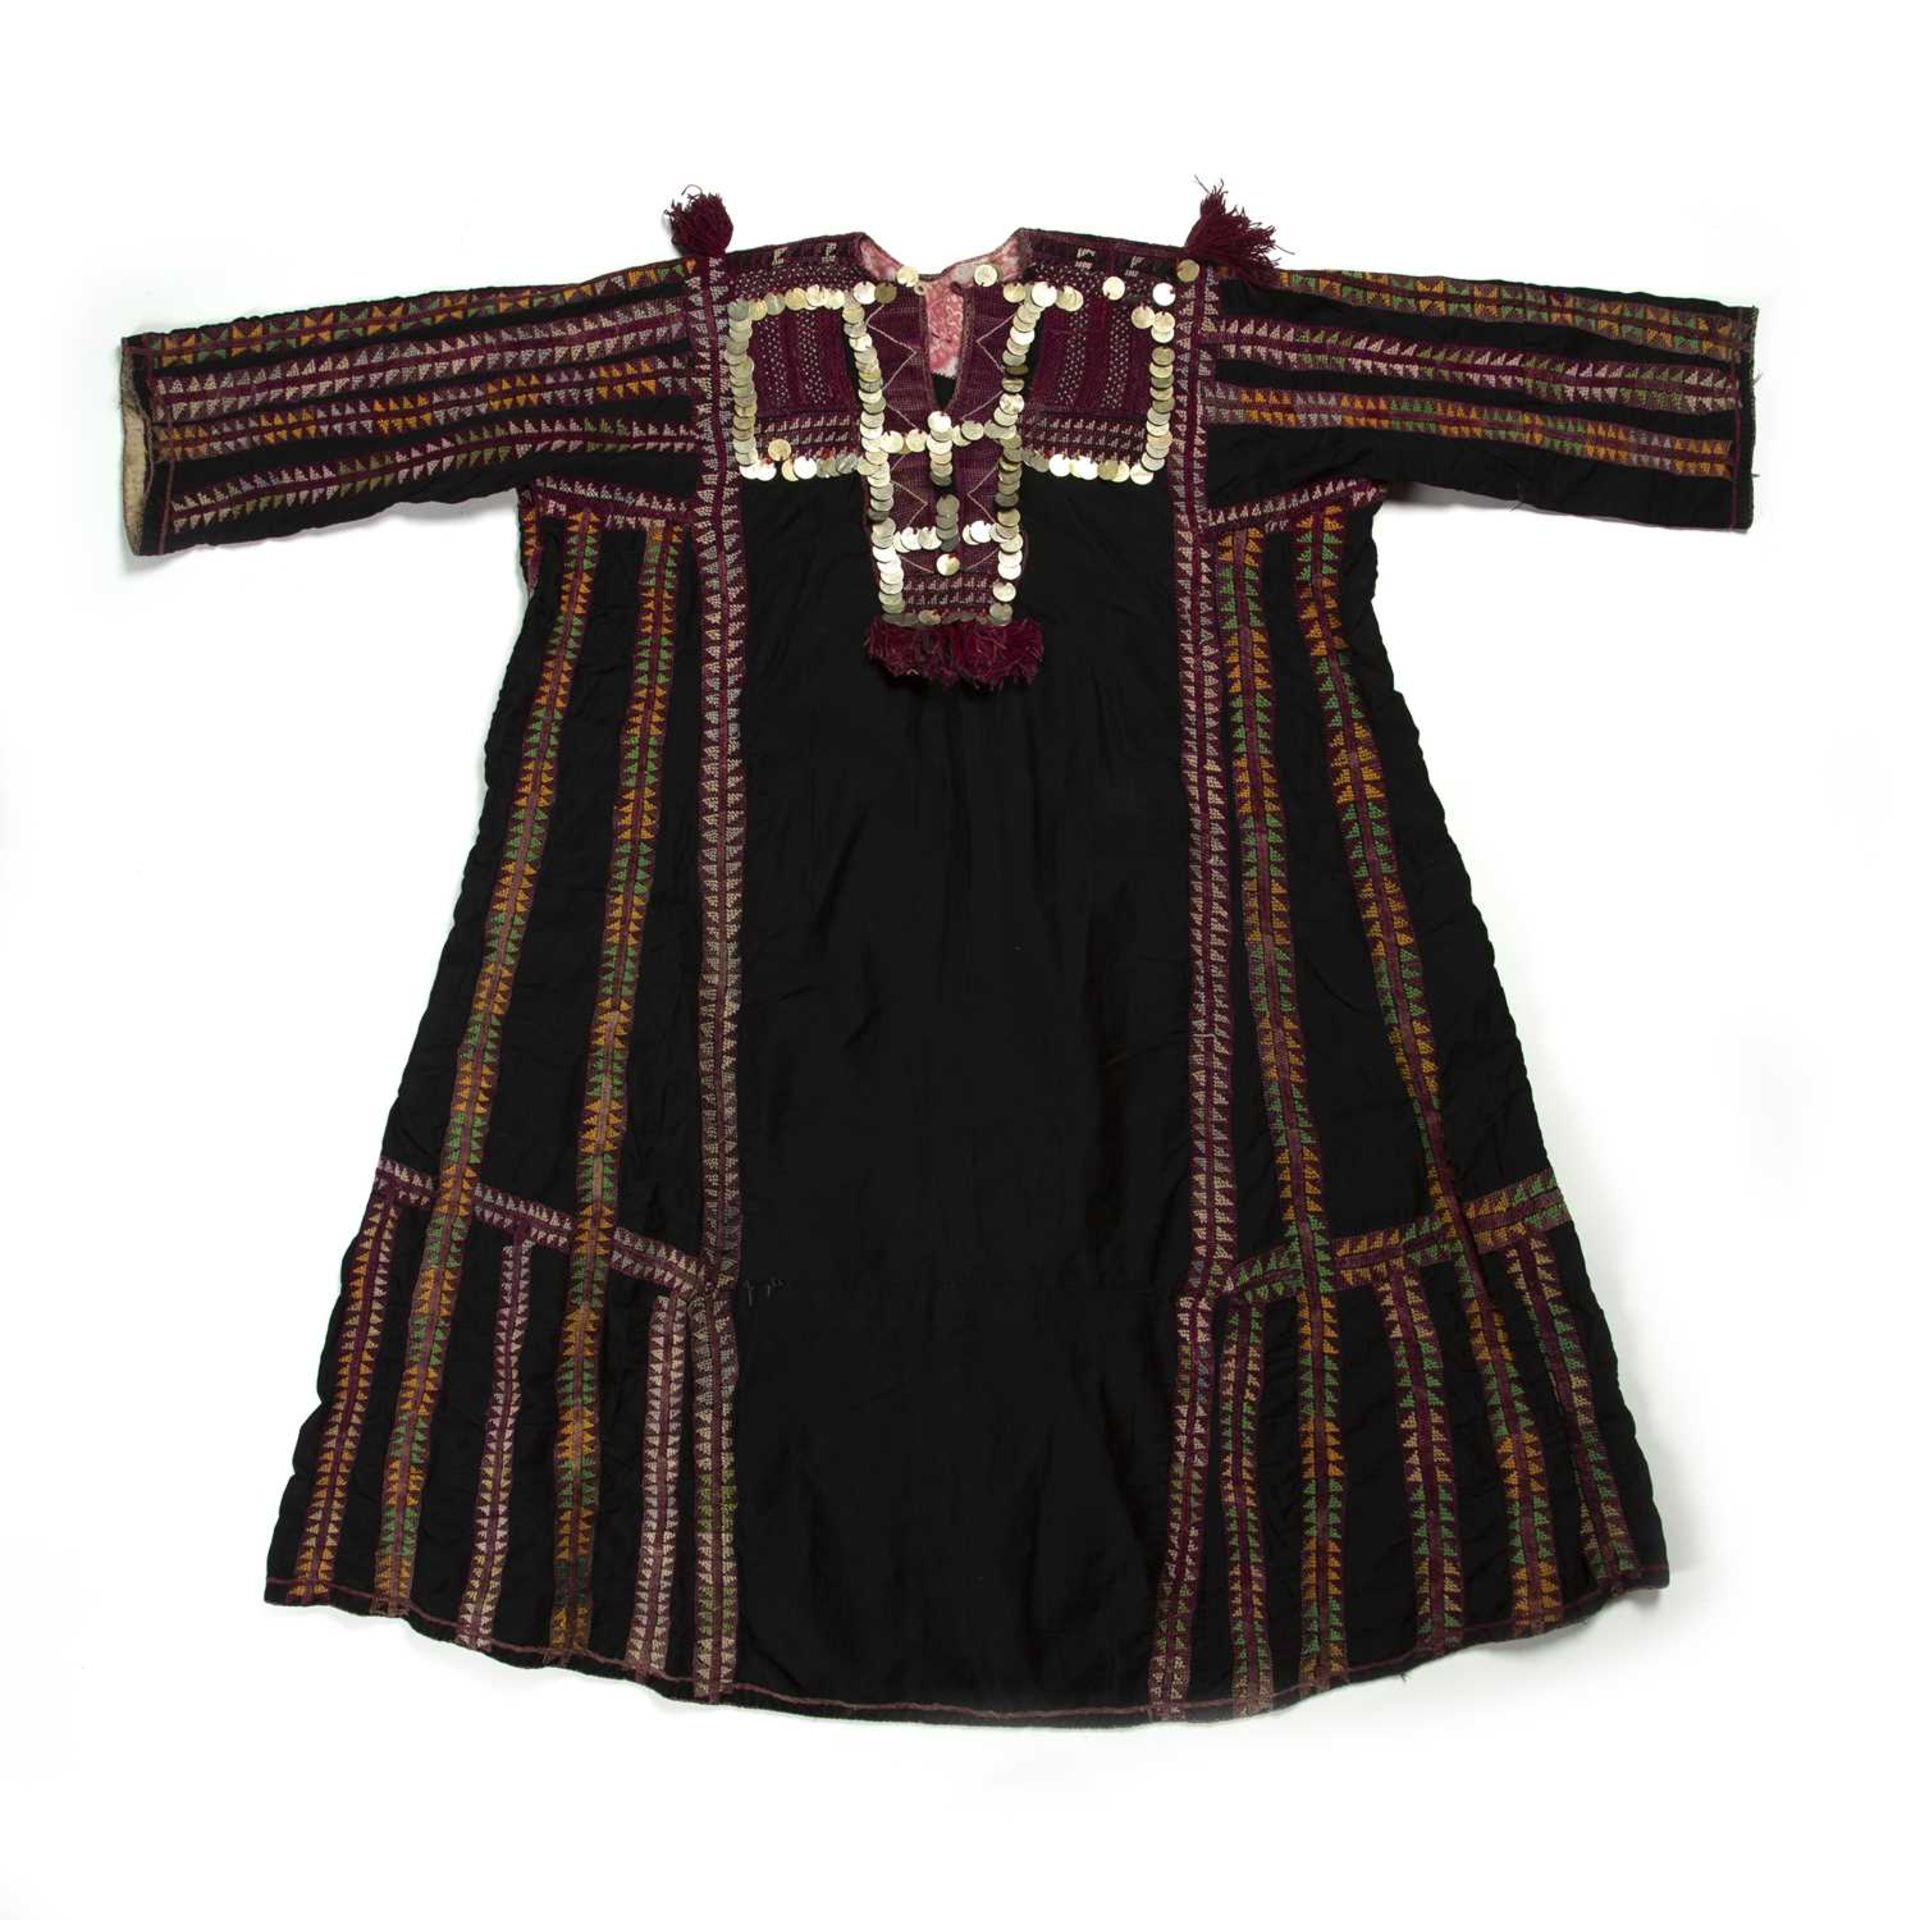 Black ground dress Palestinian with geometric embroidered borders in yellow, green and purple,